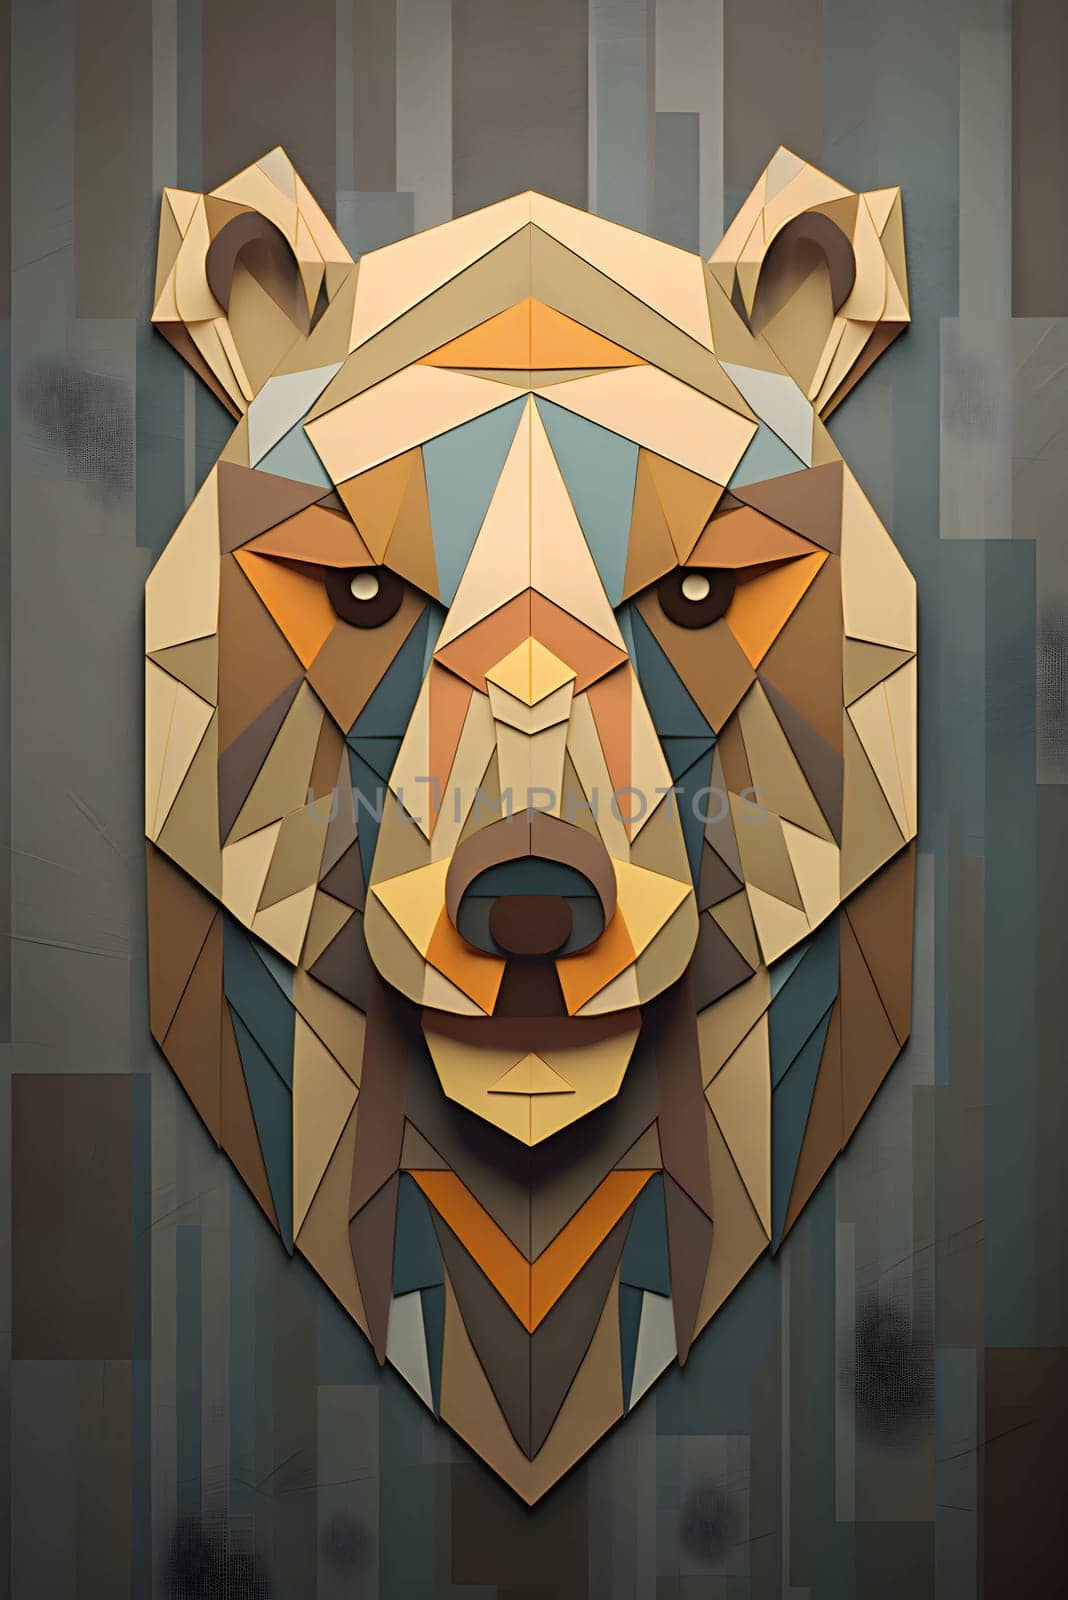 Abstract illustration: Vector illustration of a bear head made of polygonal geometric shapes